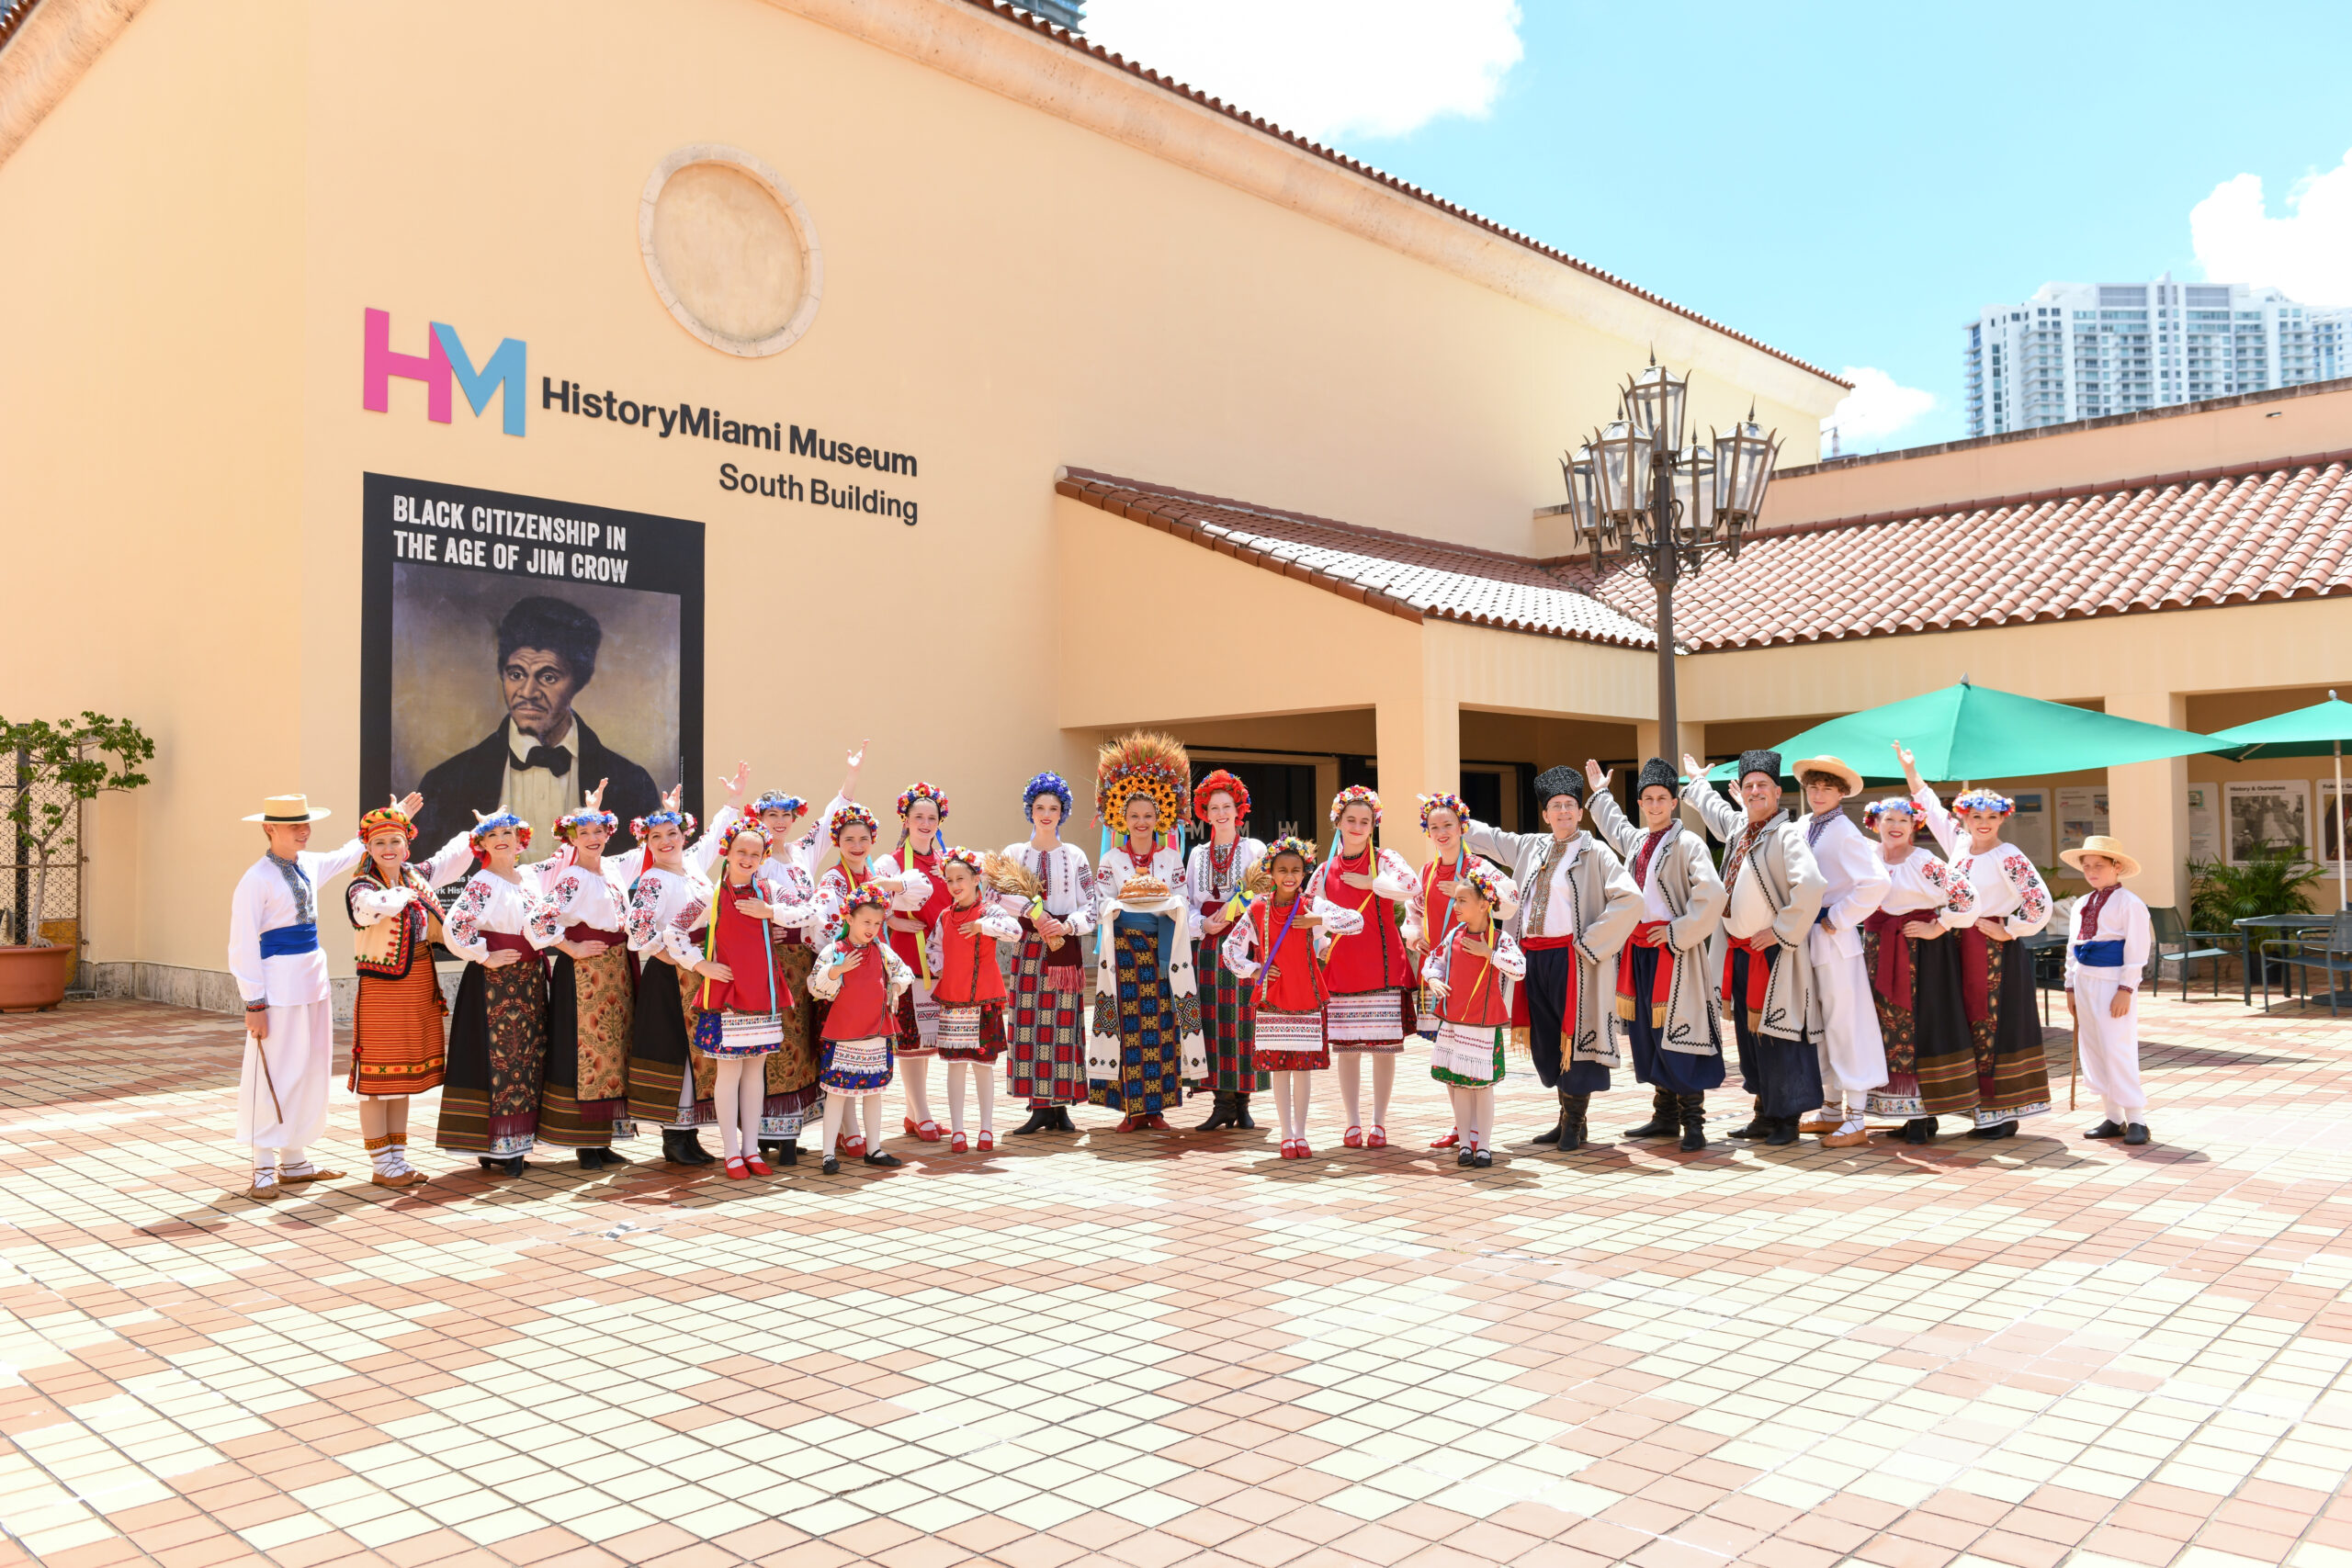 The Ukrainian Dancers of Miami pose in front of the HistoryMiami Museum building.